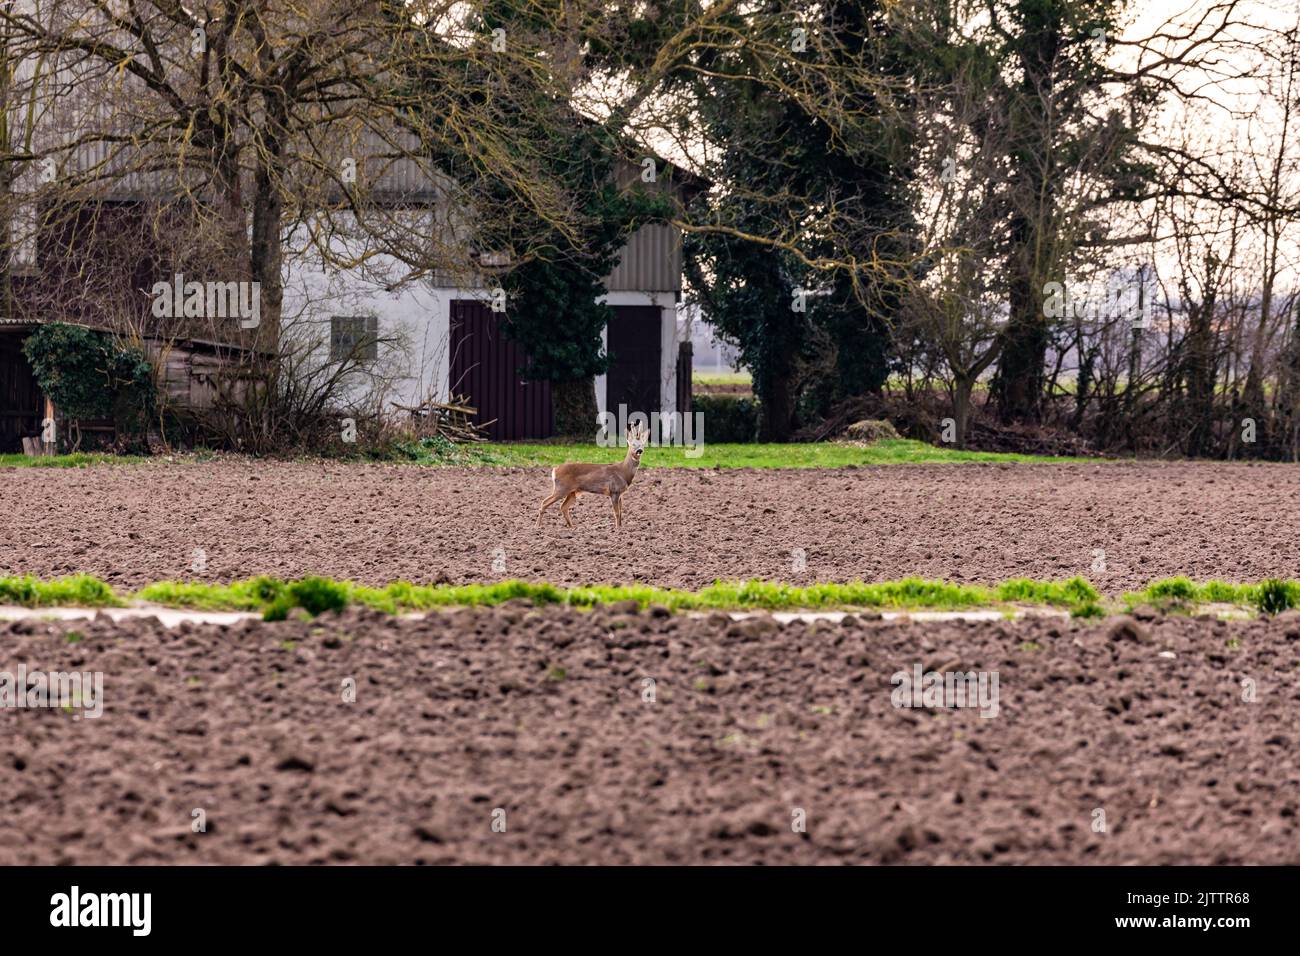 In search of food, a deer roams the fields and meadows at a farm Stock Photo